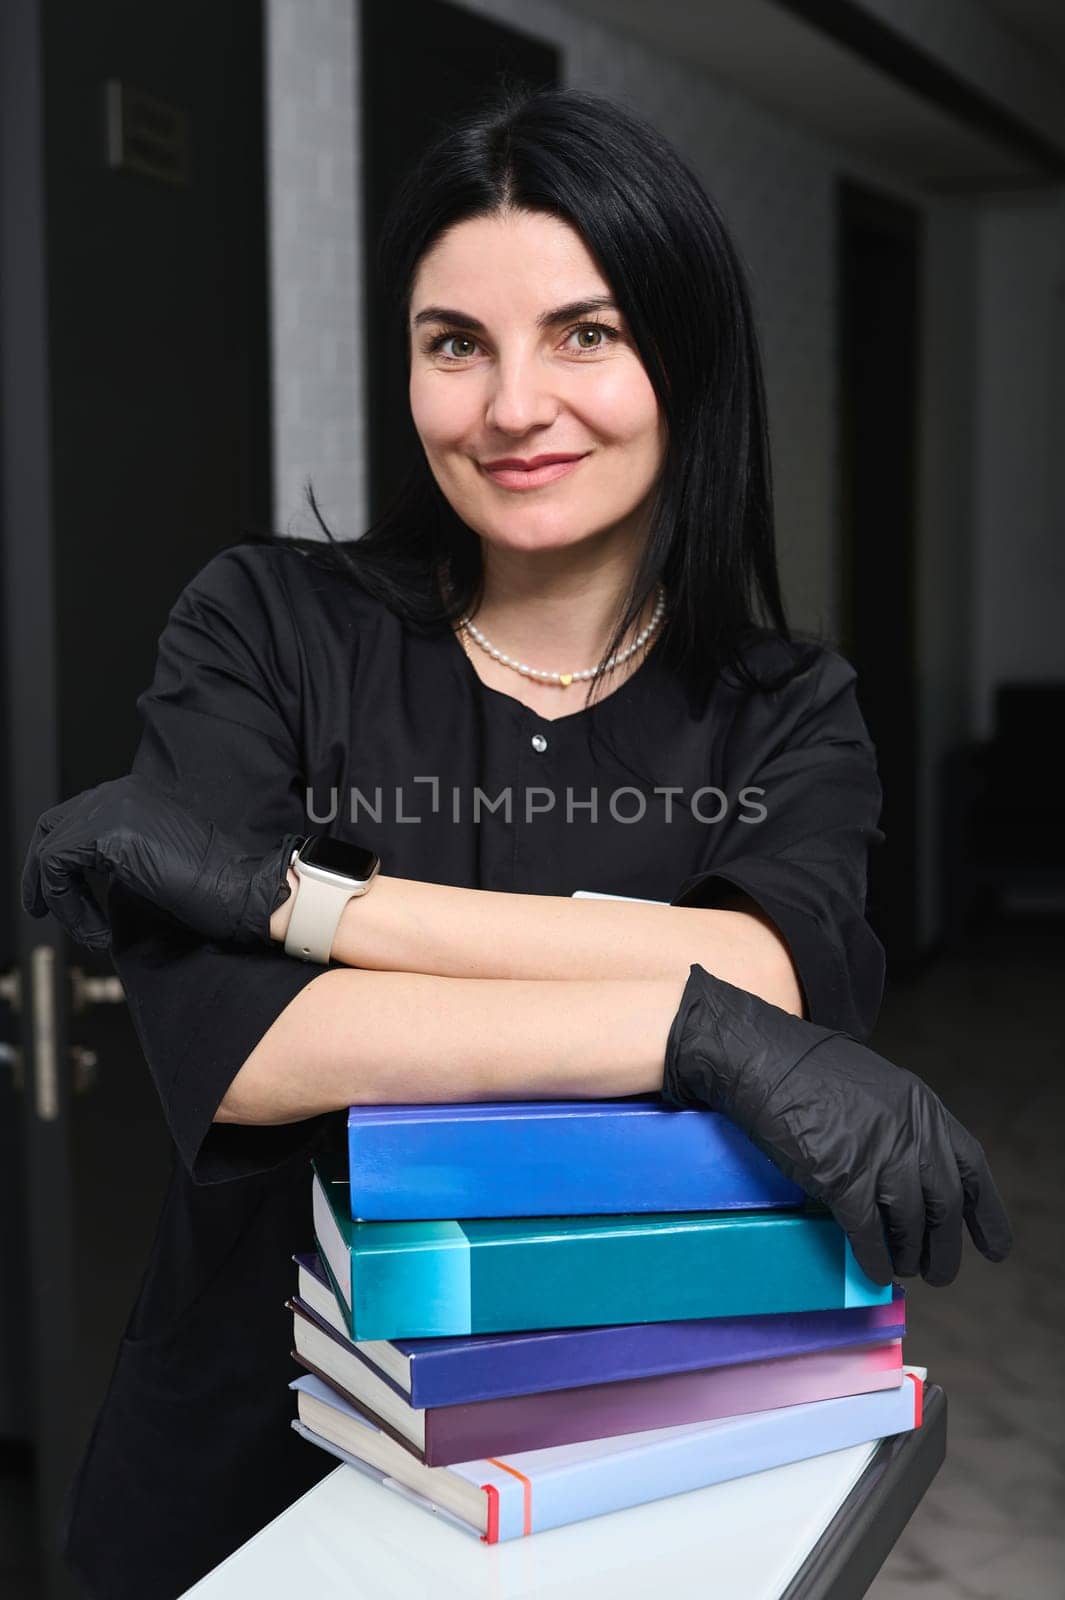 Authentic portrait of dark-haired Caucasian attractive confident experienced woman doctor, dressed in black medical uniform, standing at desk with educational books, smiles looking at camera. Medicine